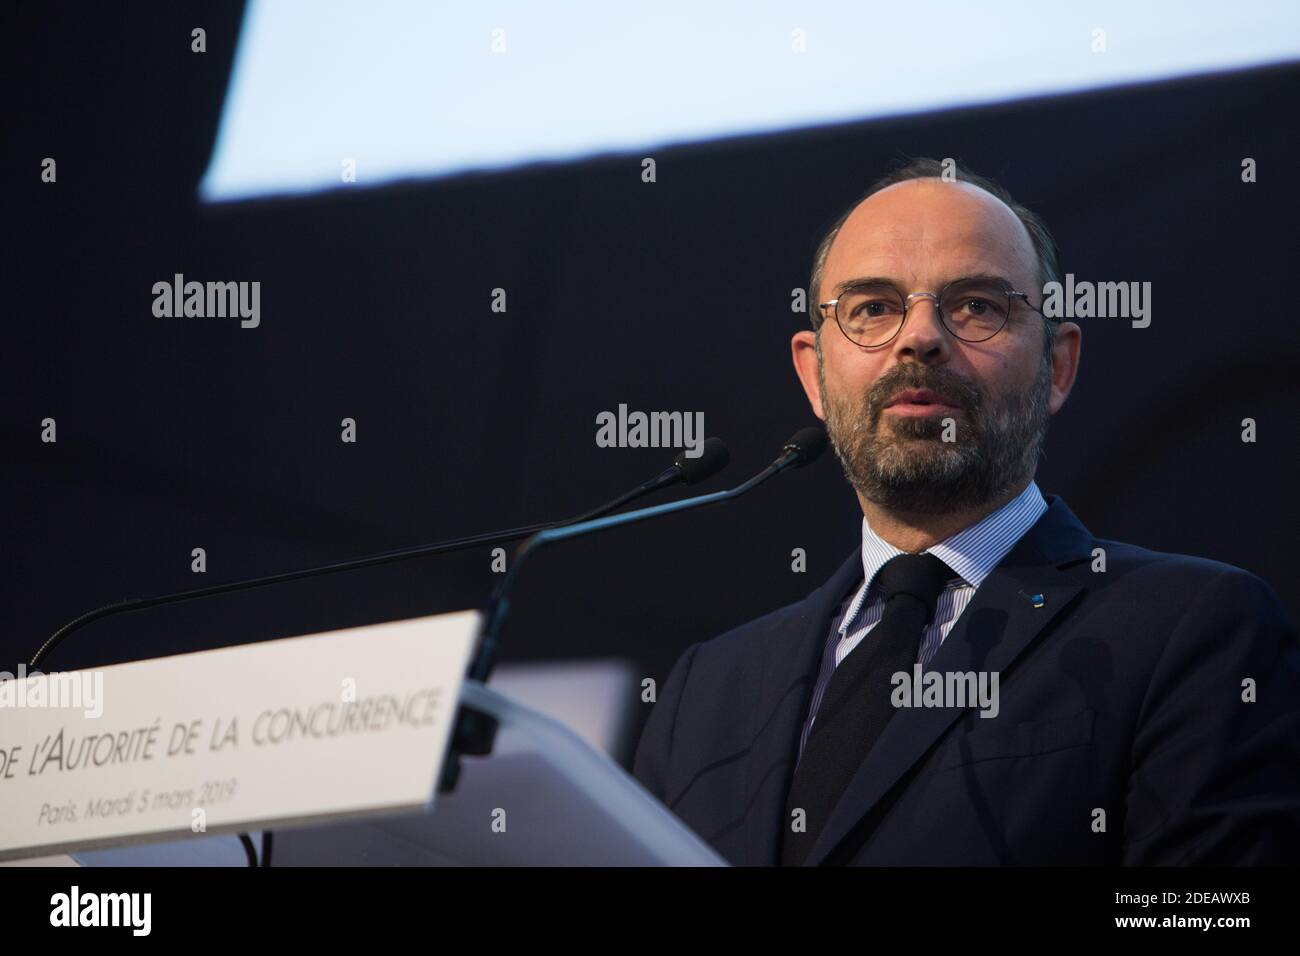 Prime minister Edouard Philippe during the 10th anniversary of the Autorite de la Concurrence (Competition Authority) forum event in Paris on March 5, 2019. Photo by Raphaël Lafargue/ABACAPRESS.COM Stock Photo